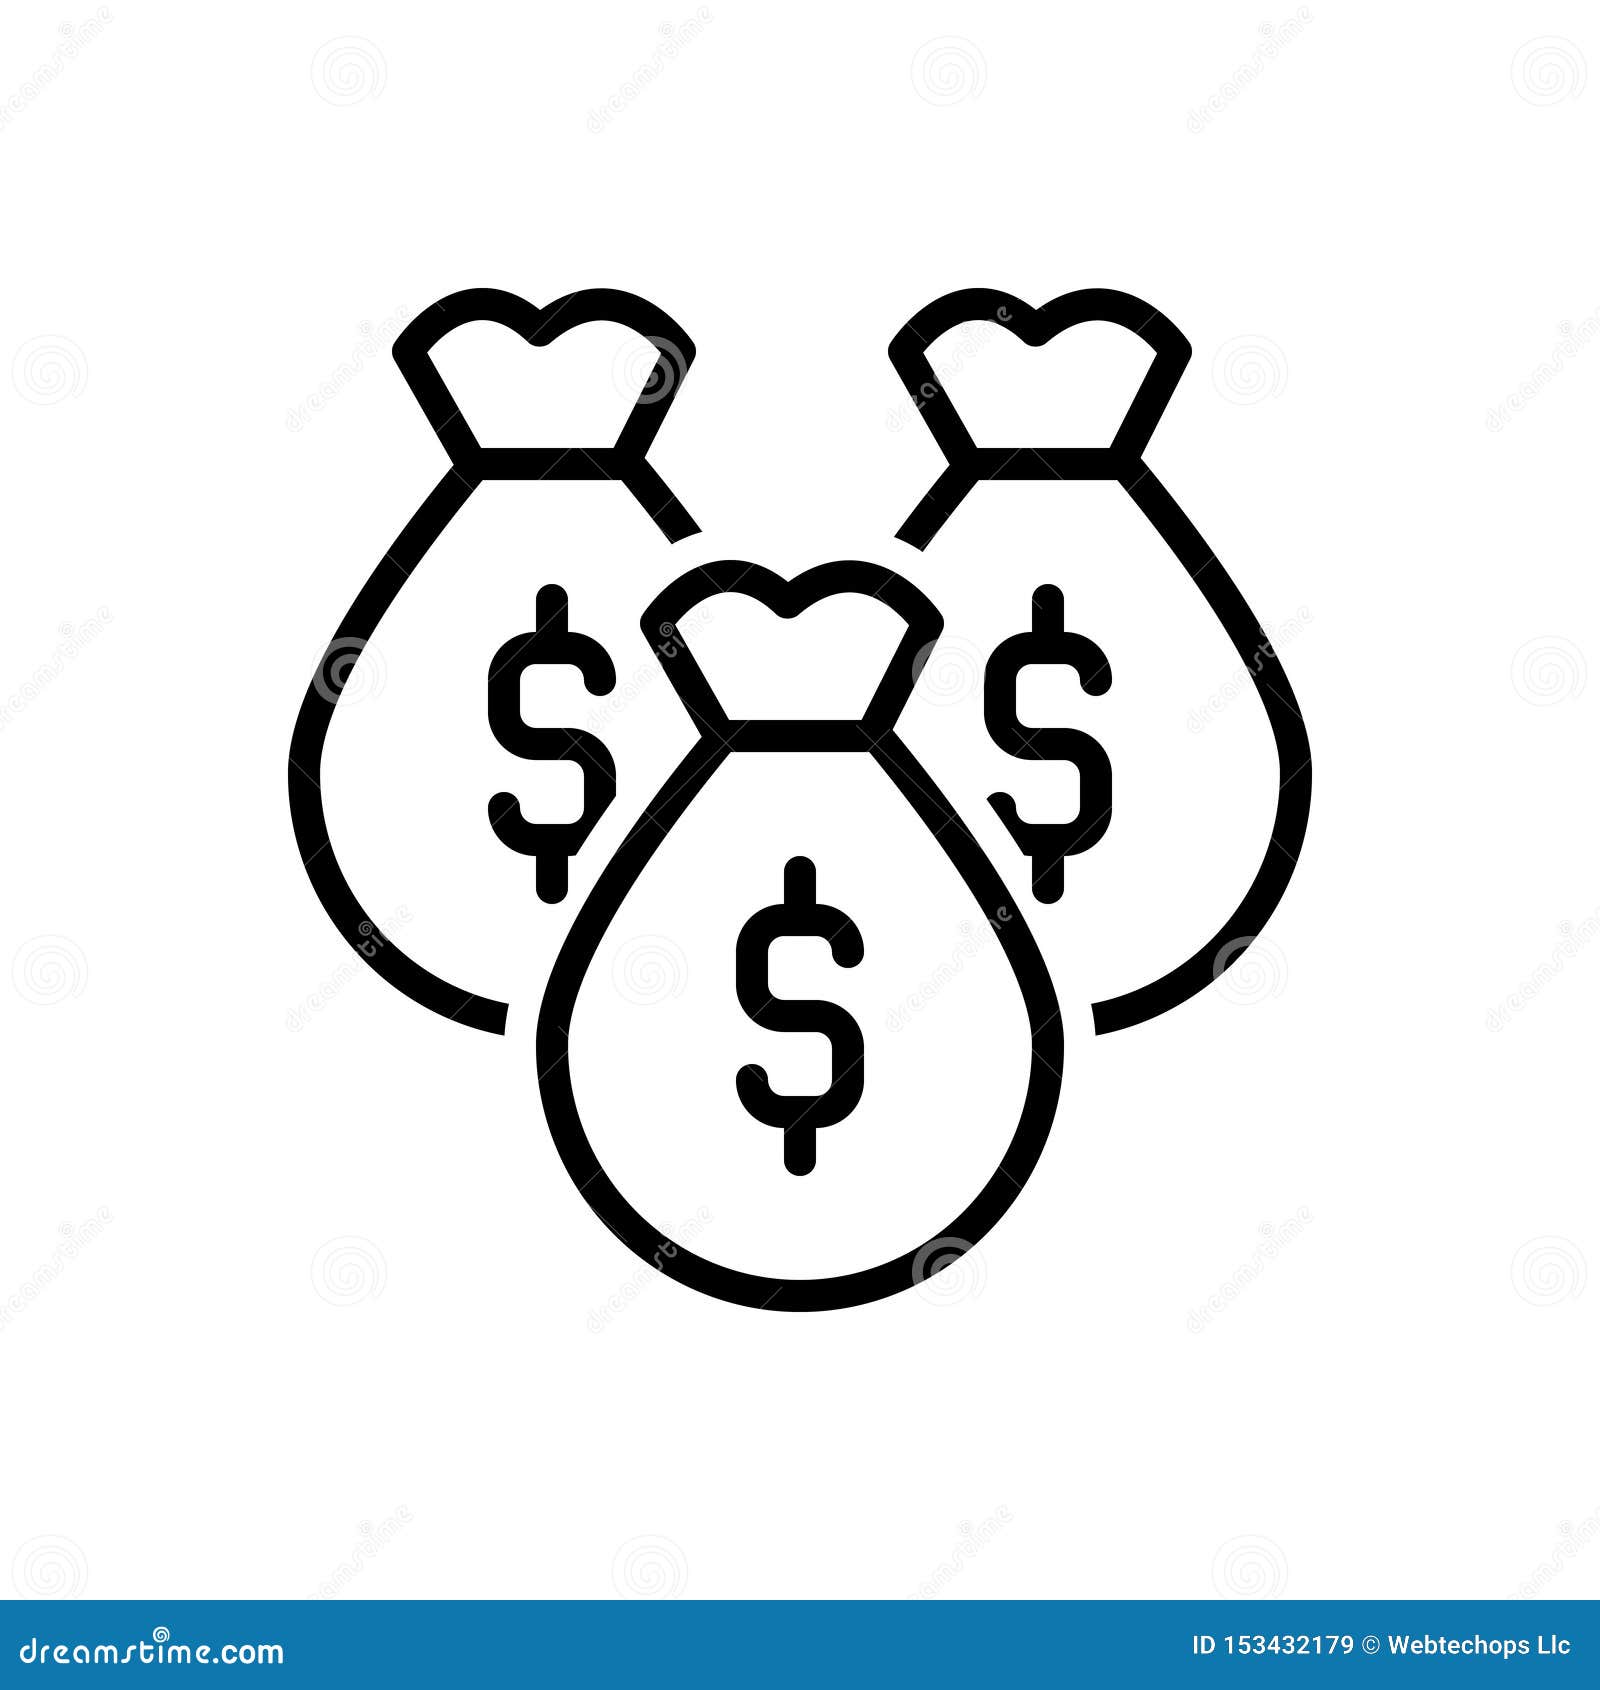 black line icon for money bag, riches and piles